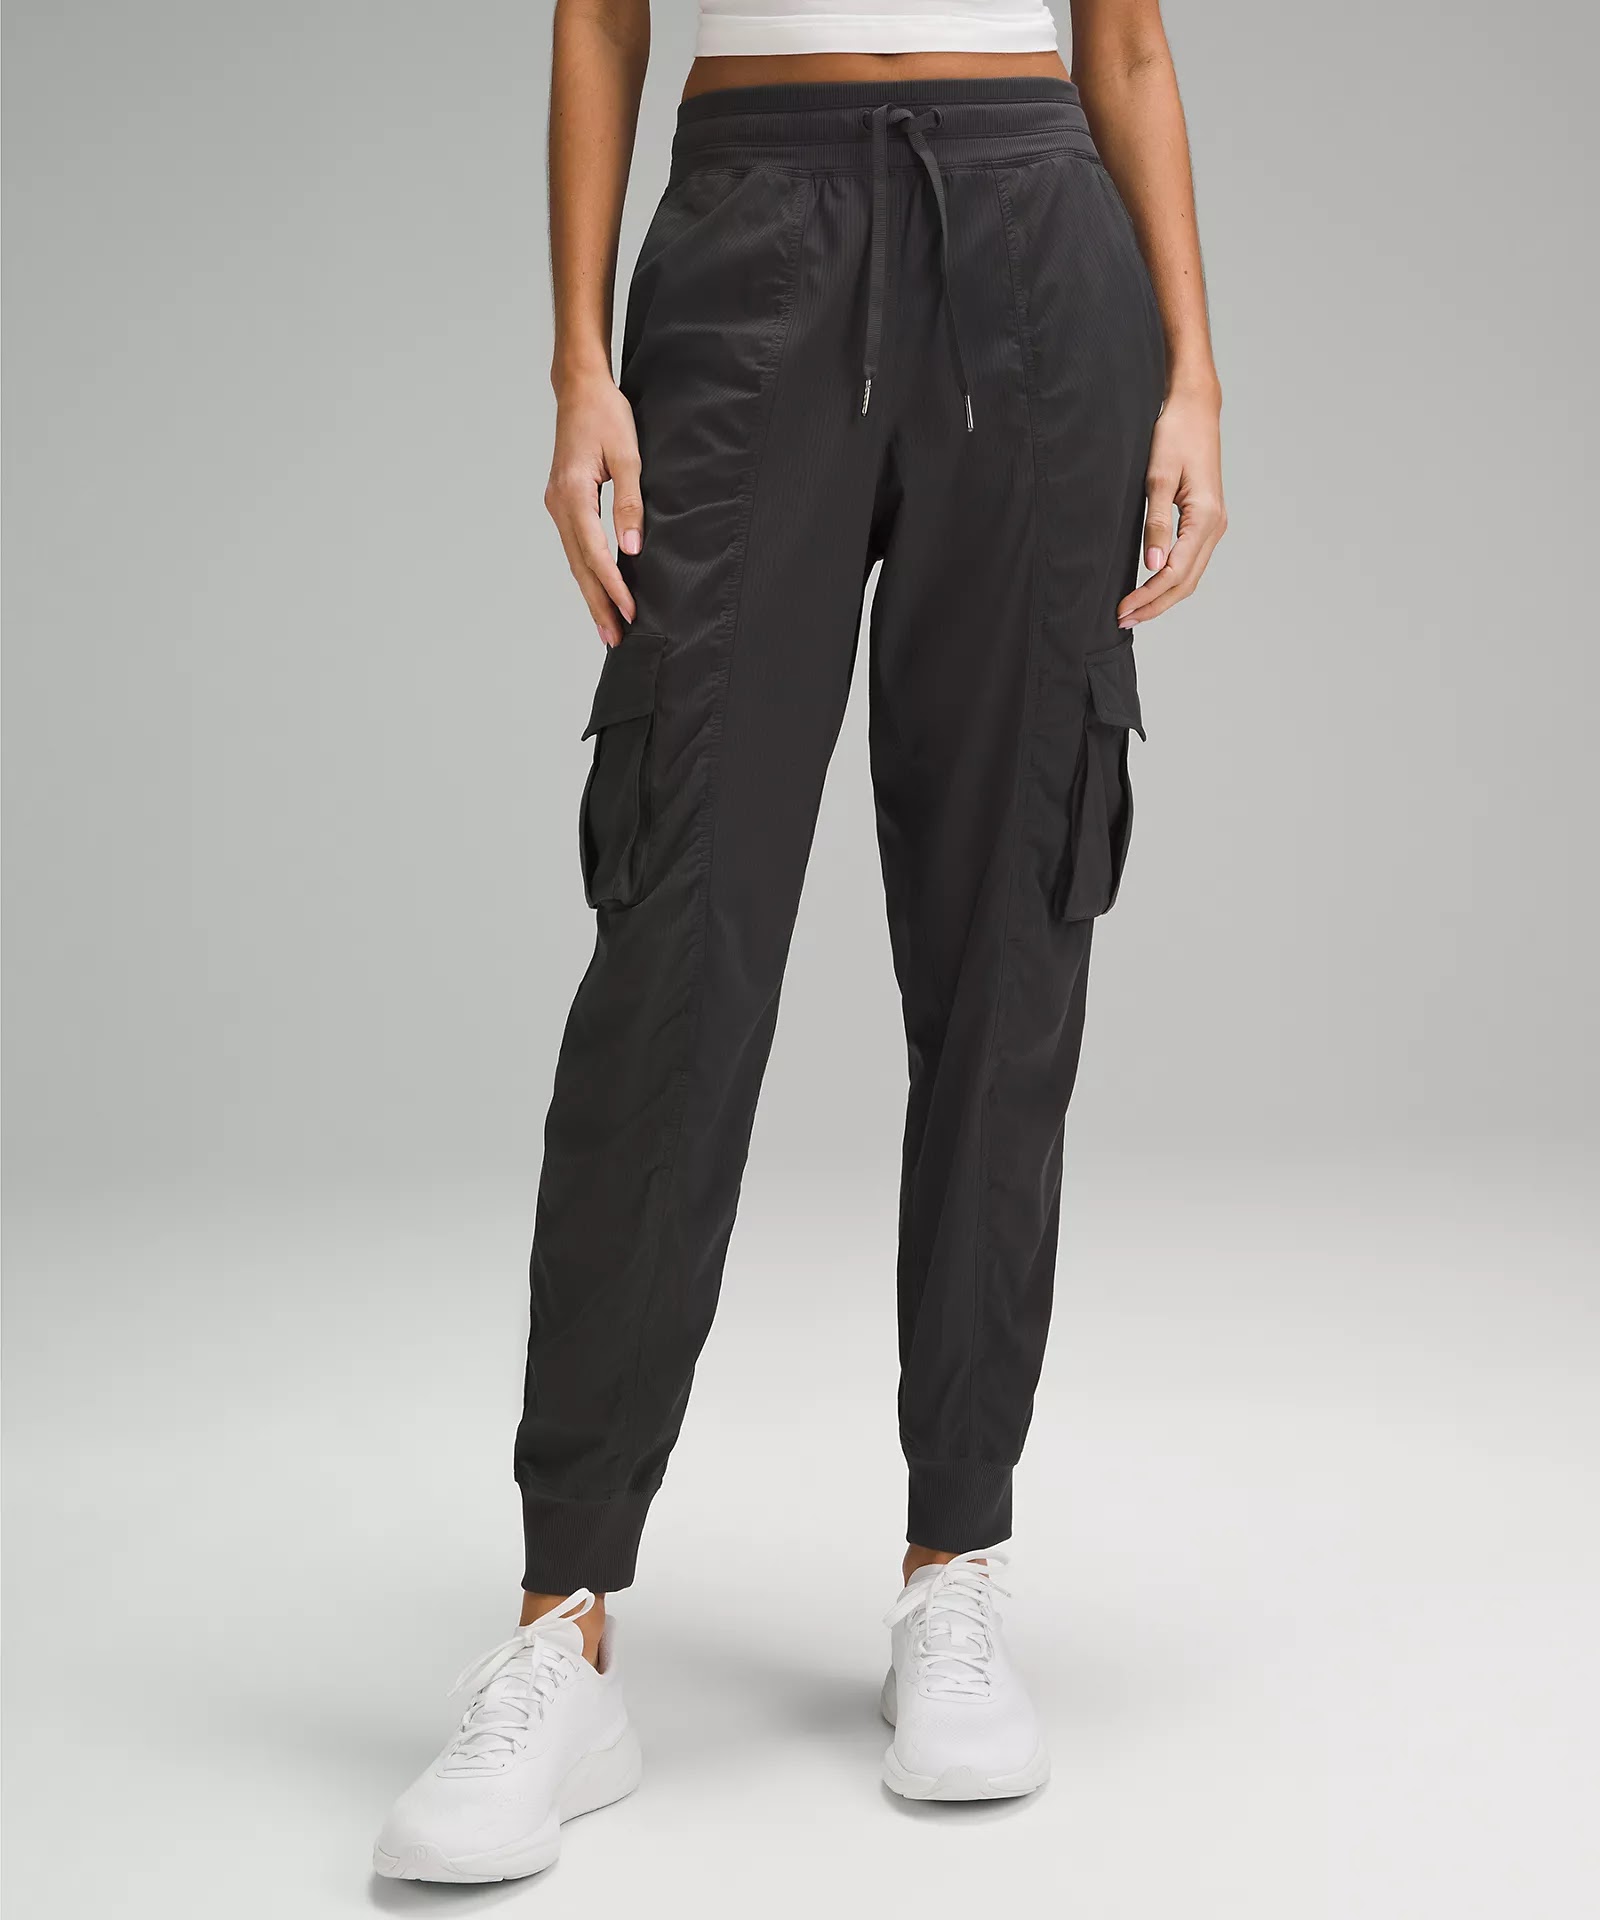 Living our best set(s) life this holiday 🤩 Our viral flare sweatpant